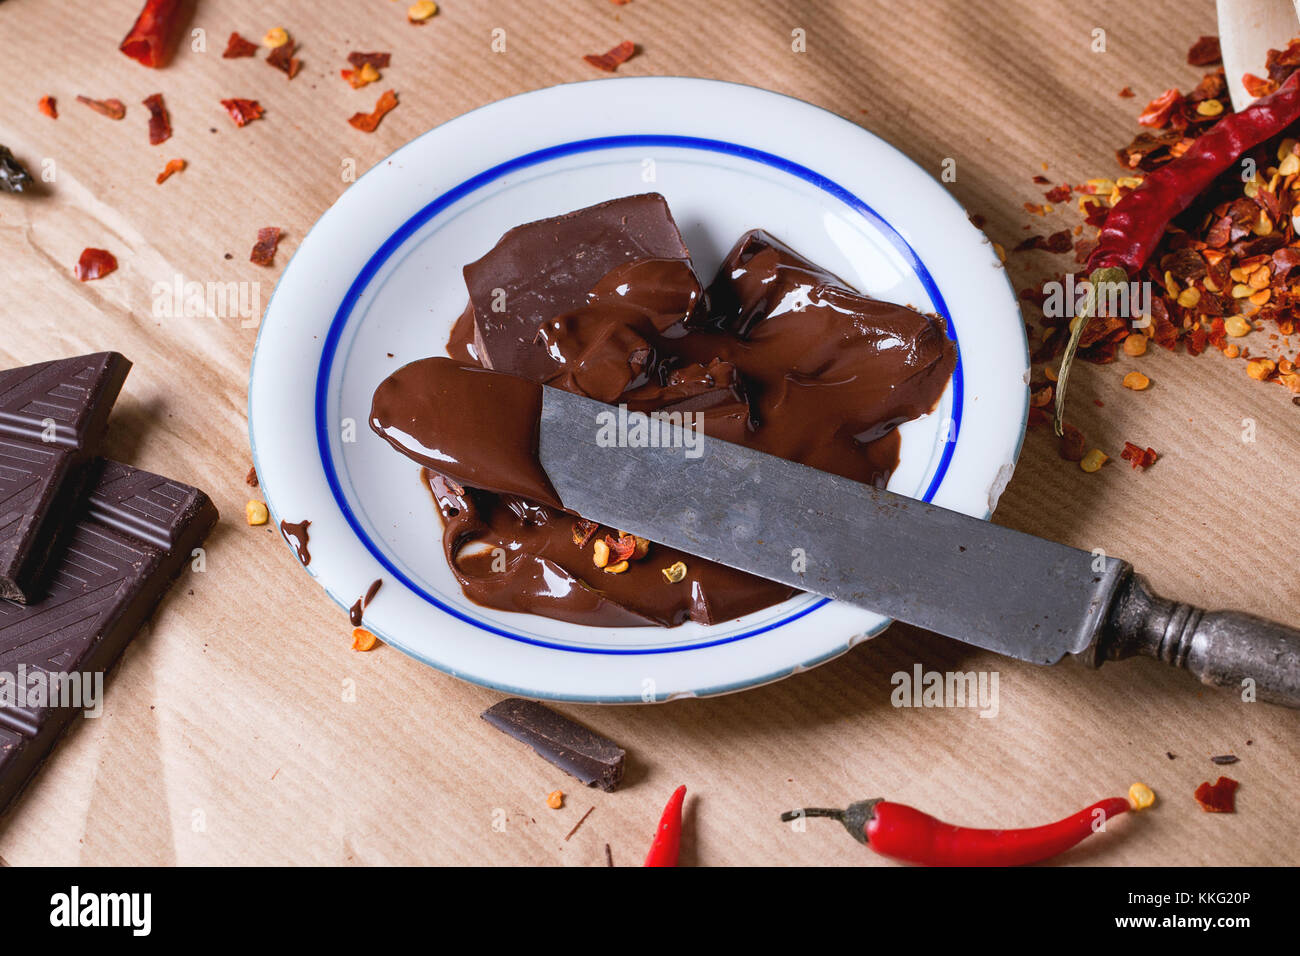 Chopping dark chocolate with fresh and dry red hot chili peppers on baking paper with plate of hot melted chocolate and vintage knife. Square image Stock Photo